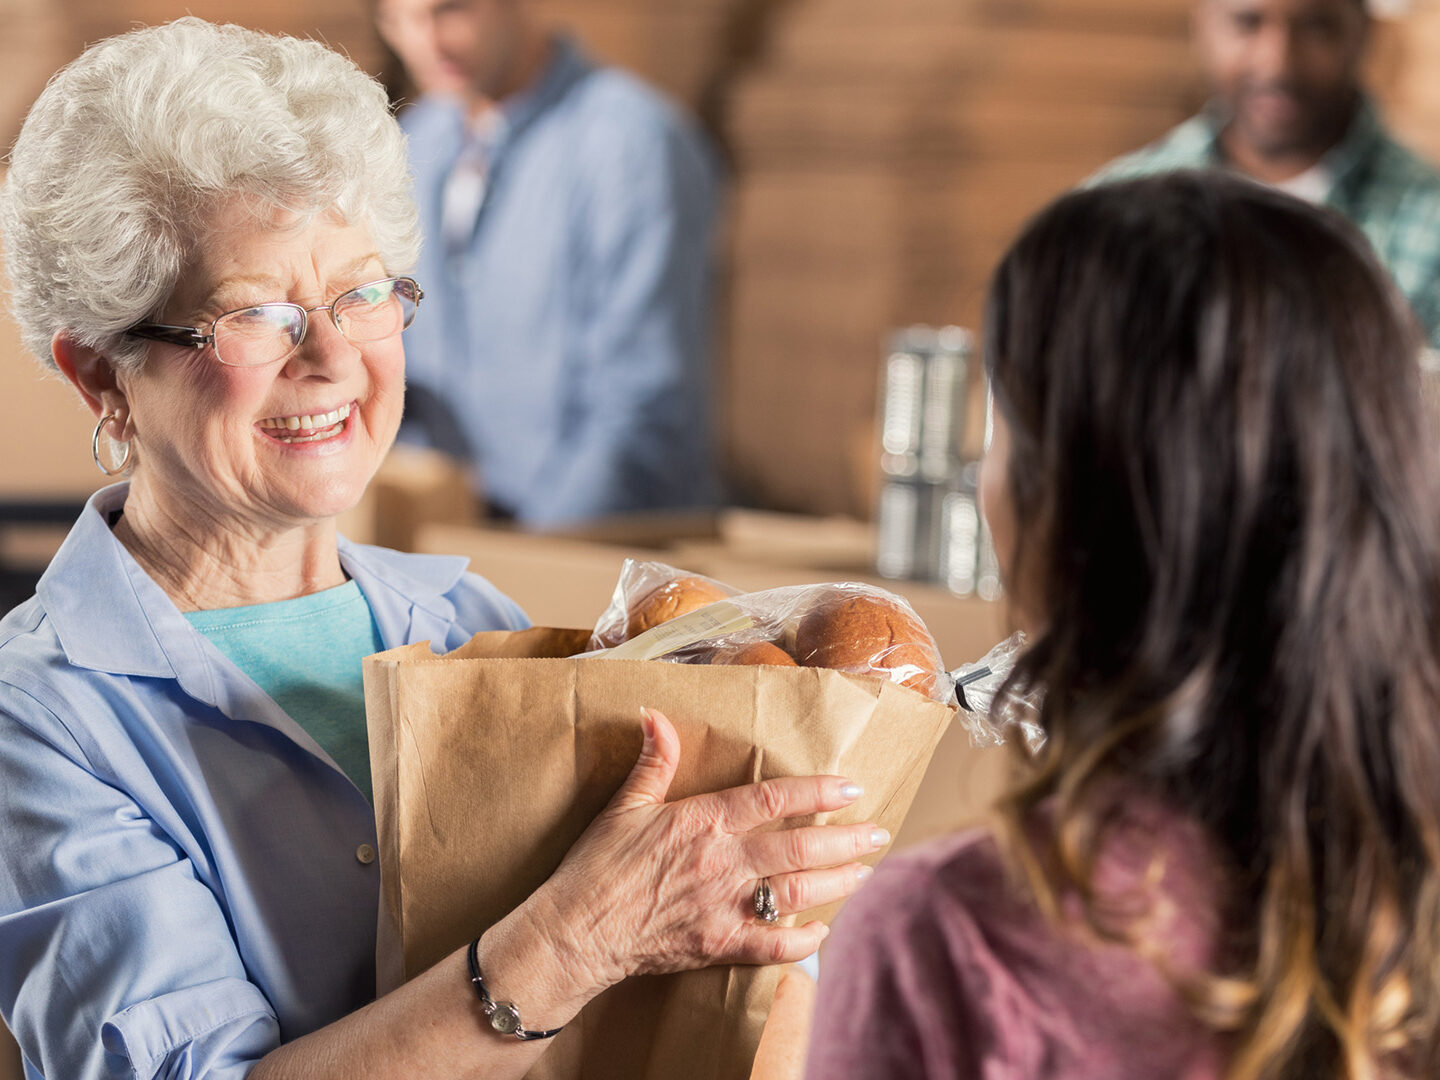 A beautiful senior woman donates a bag of groceries during a community food drive.